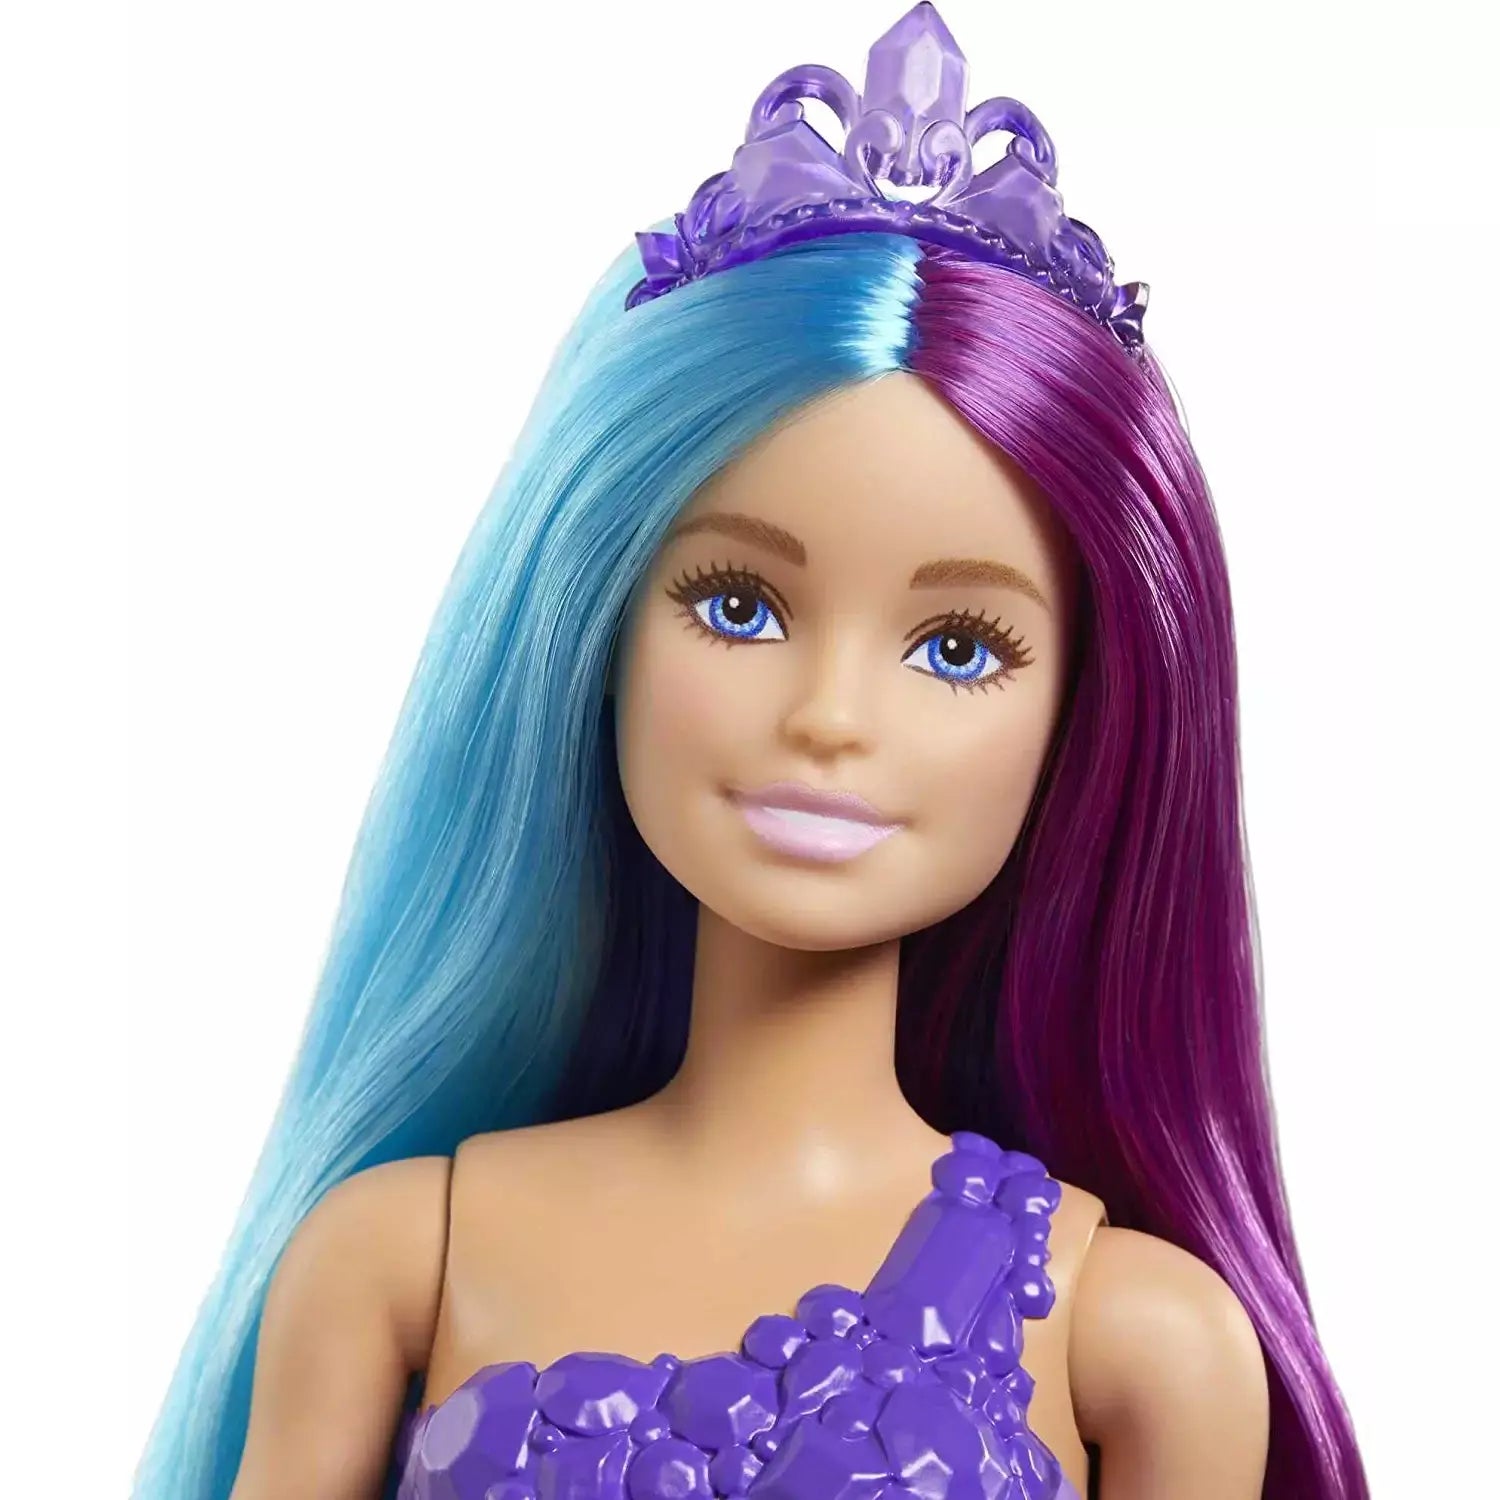 Barbie Dreamtopia Mermaid Doll (13-inch) with Extra-Long Two-Tone Fantasy Hair, Hairbrush, Tiaras and Styling Accessories - BumbleToys - 5-7 Years, Barbie, Fashion Dolls & Accessories, Girls, Mermaid, Pre-Order